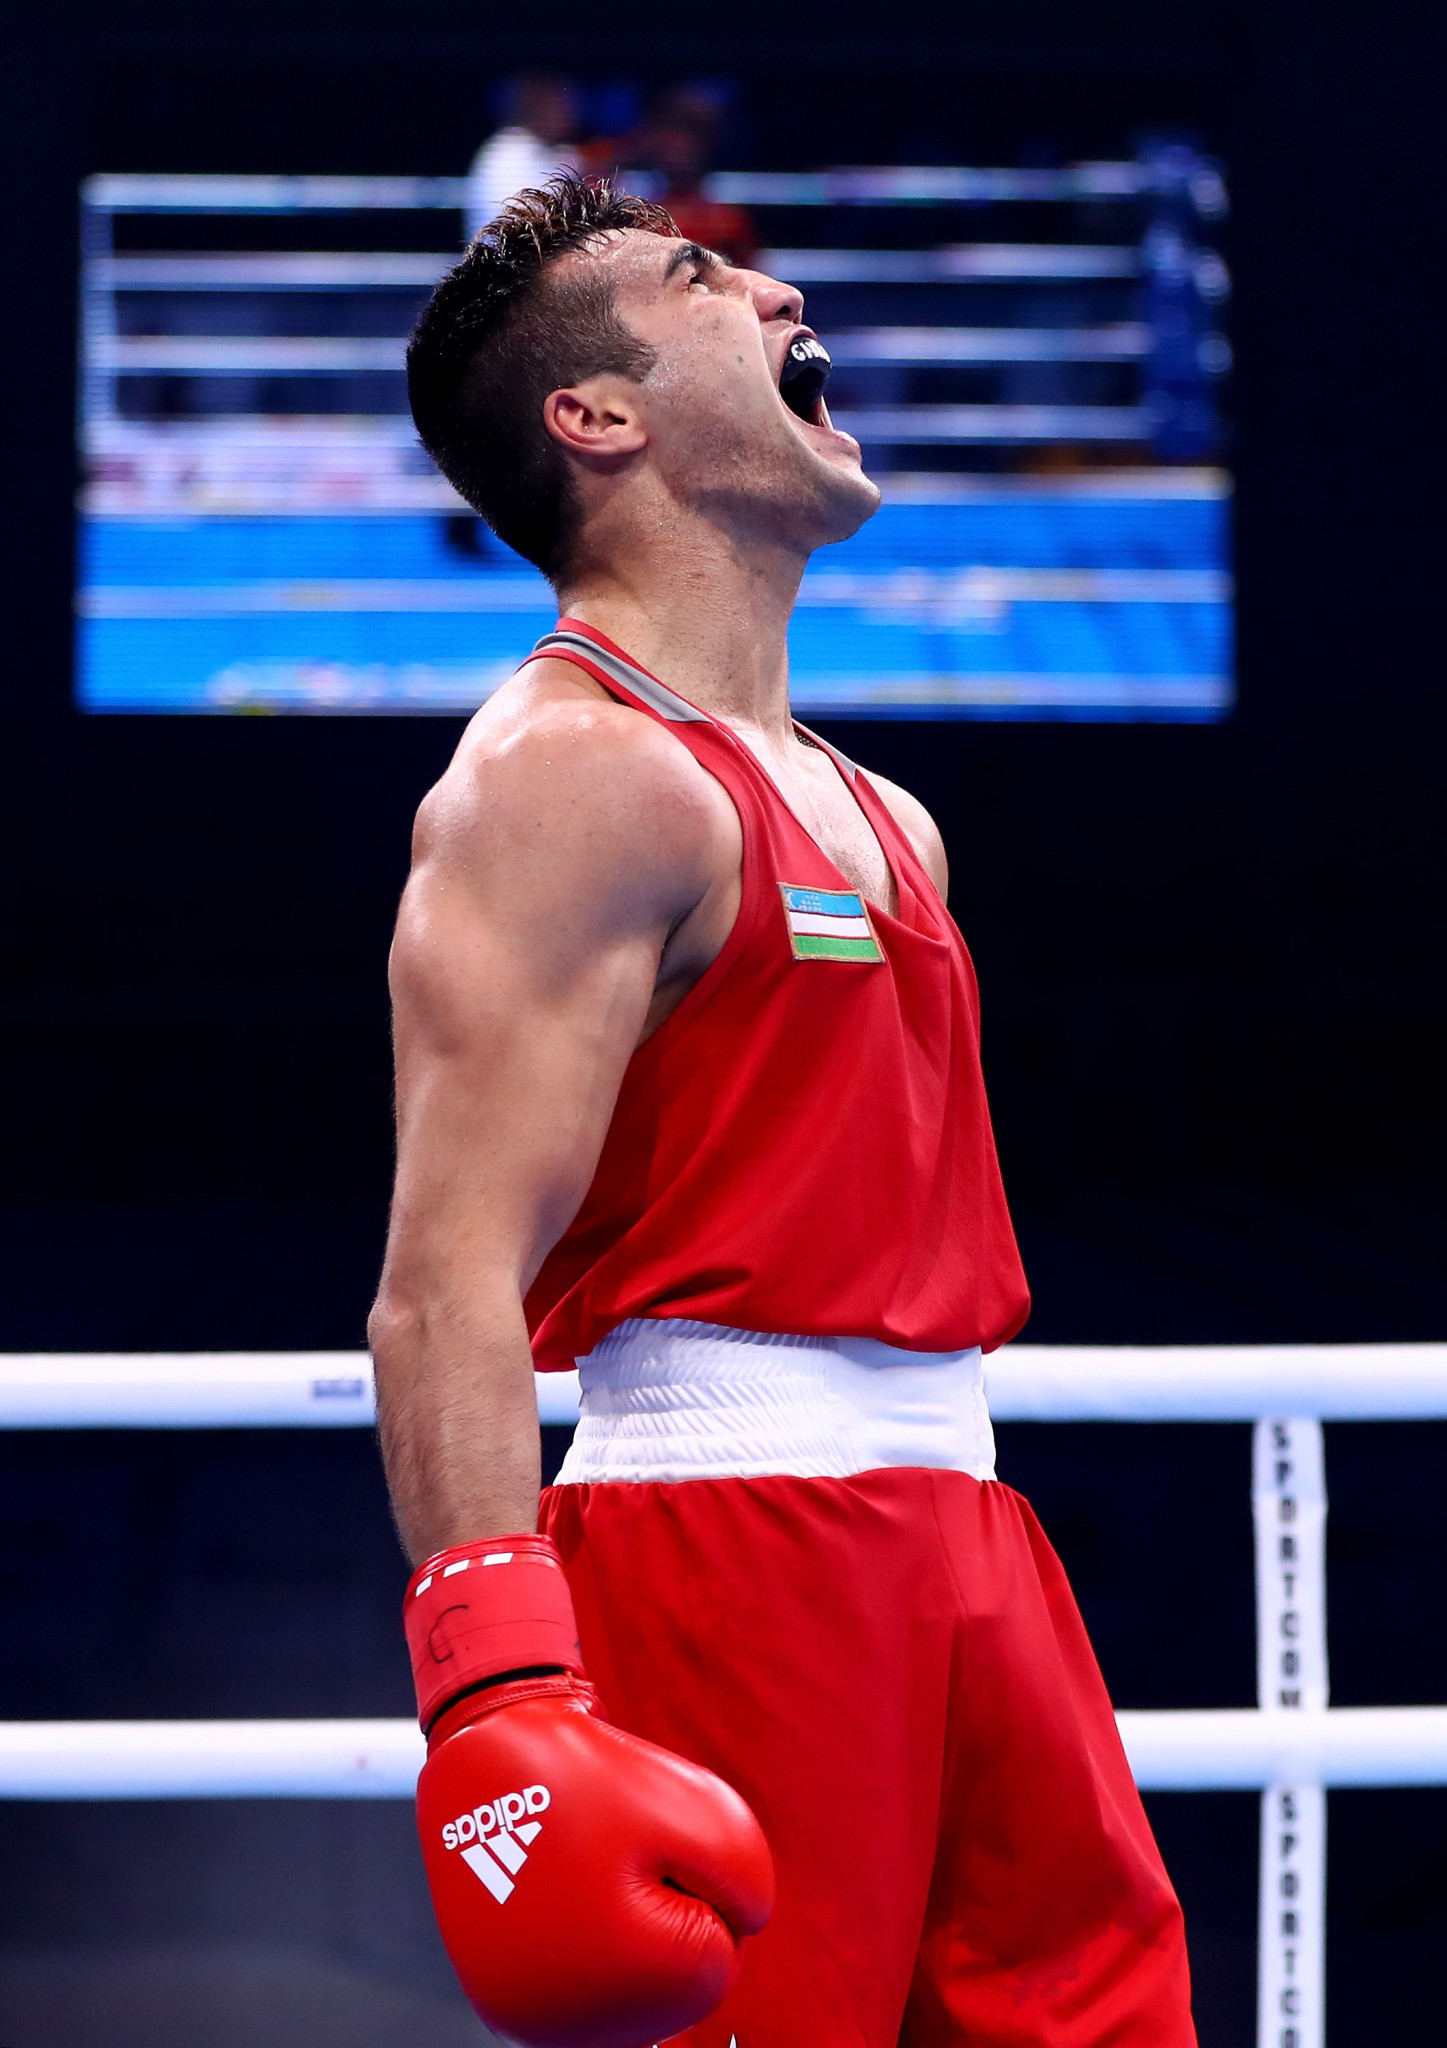 Shakhram Giyasov improved on his Olympic silver with World Championship gold ©Getty Images